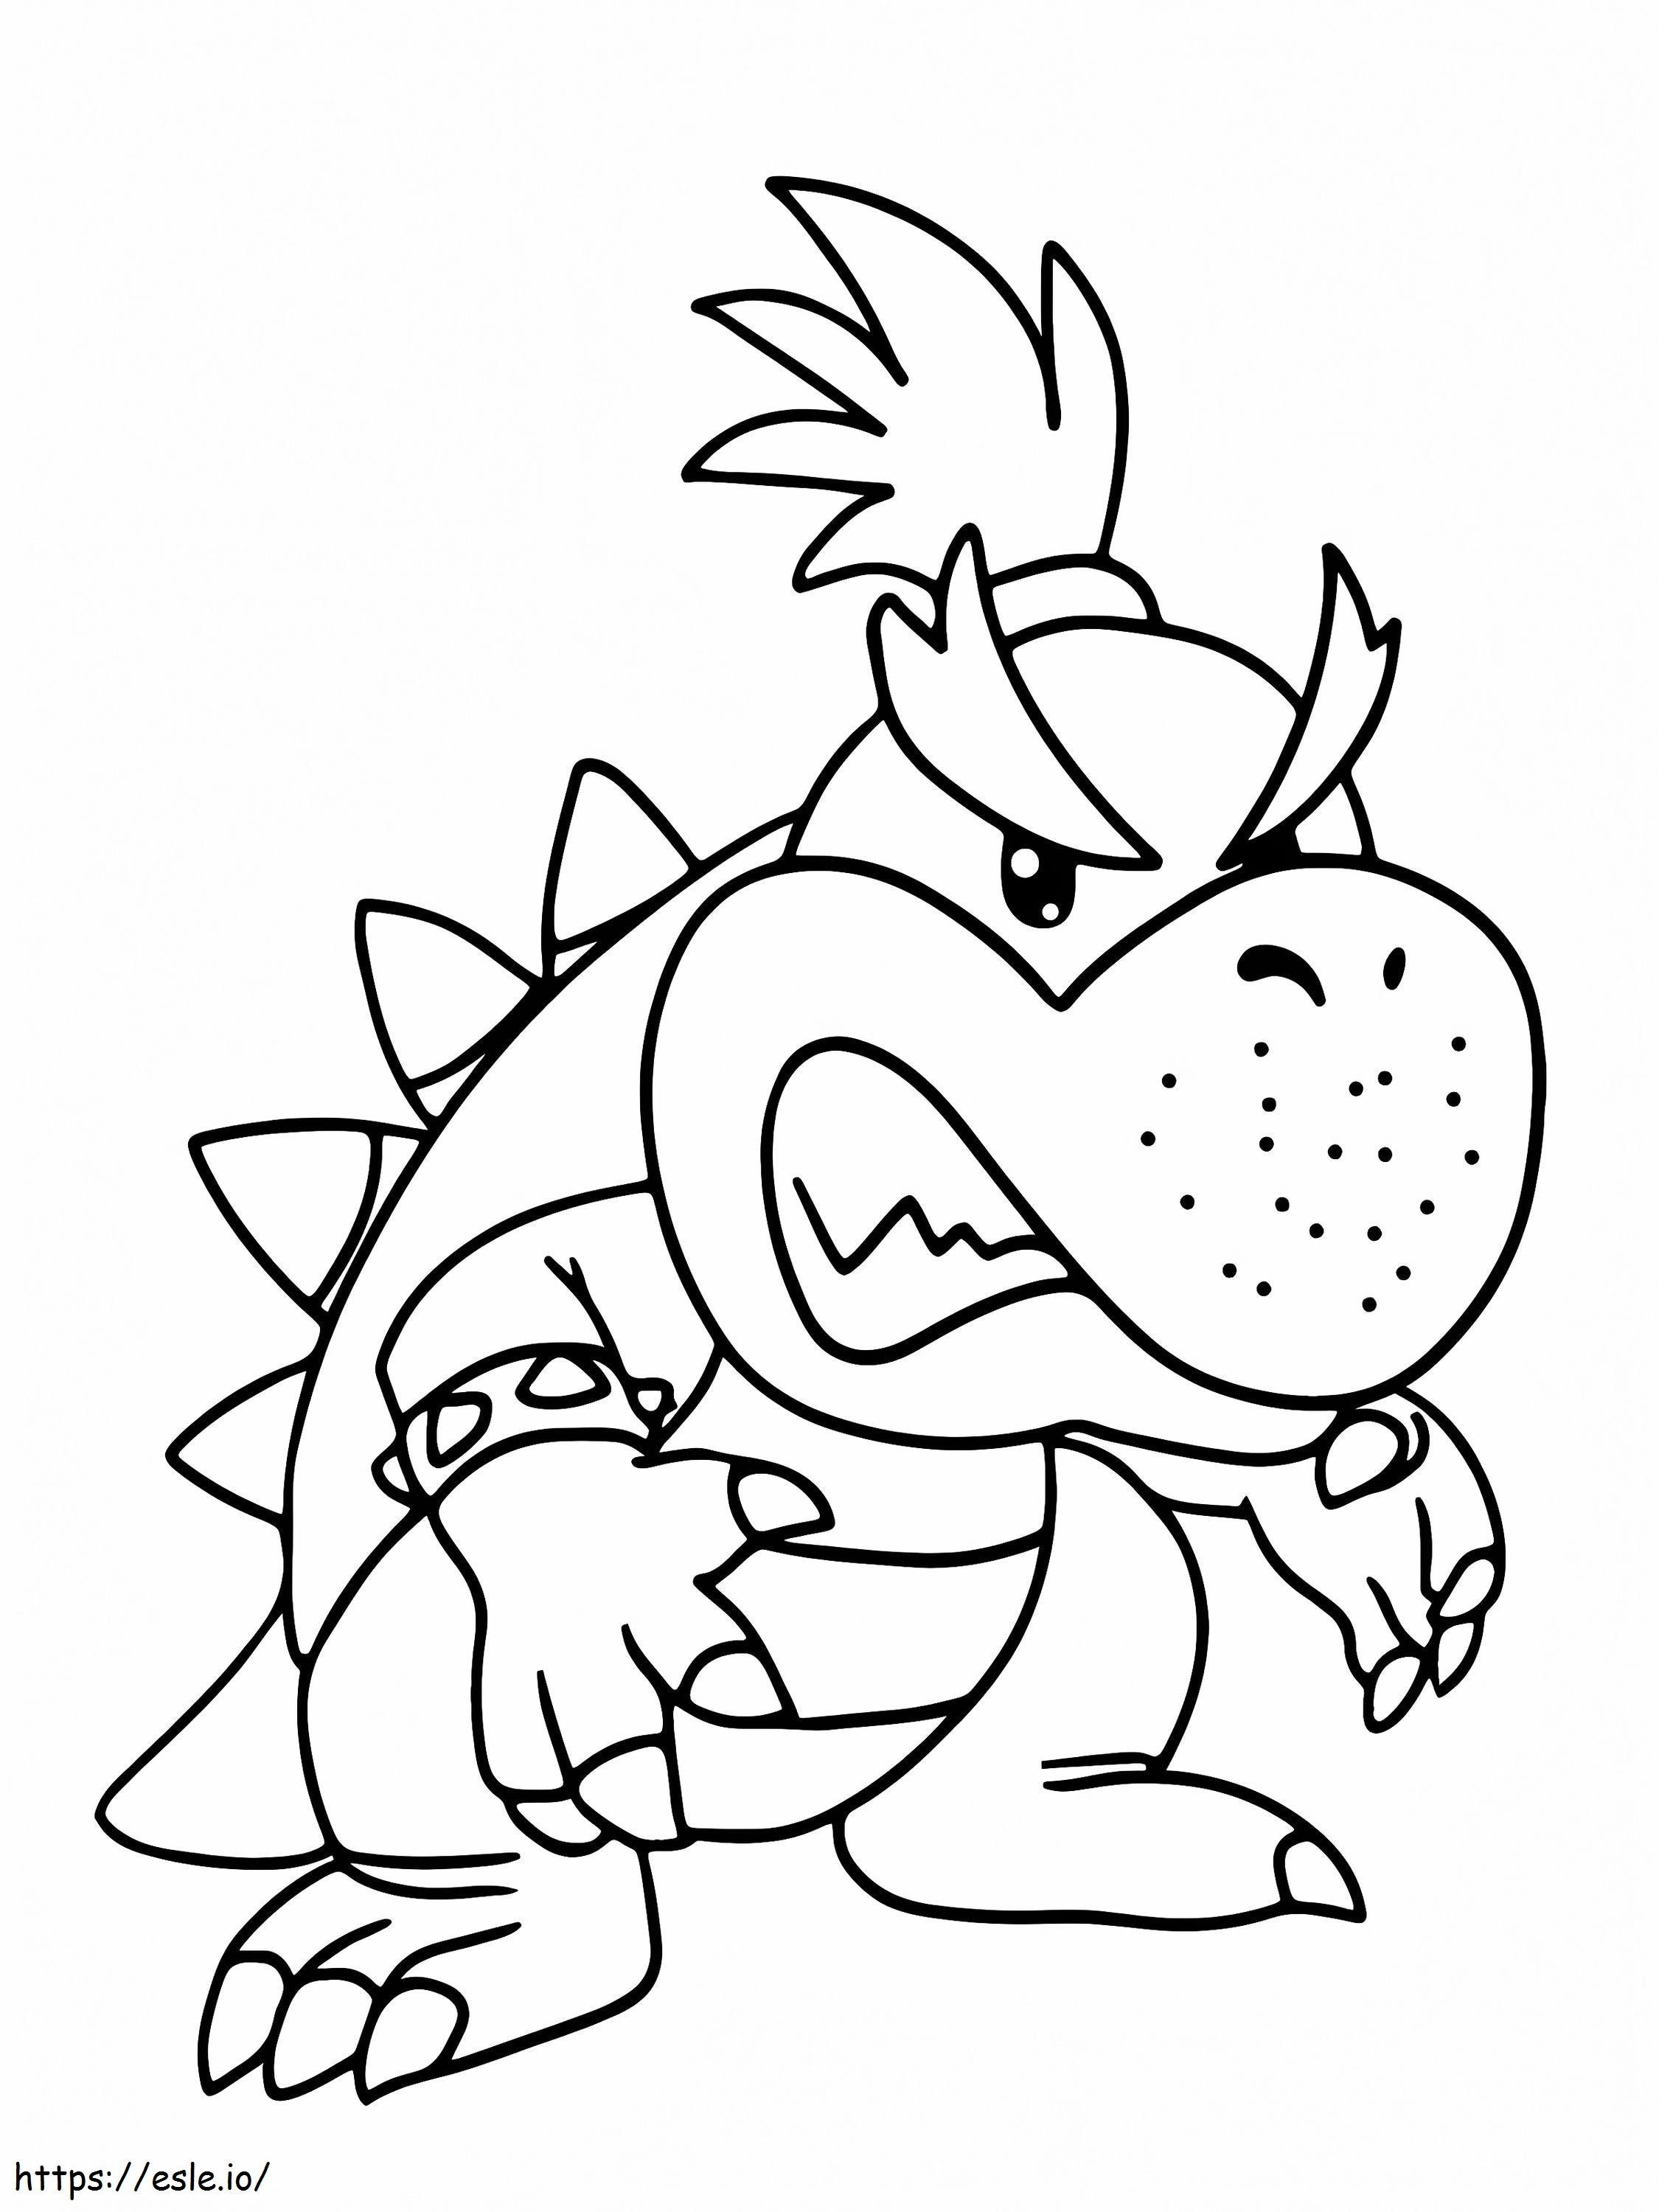 Angry Bowser Jr coloring page